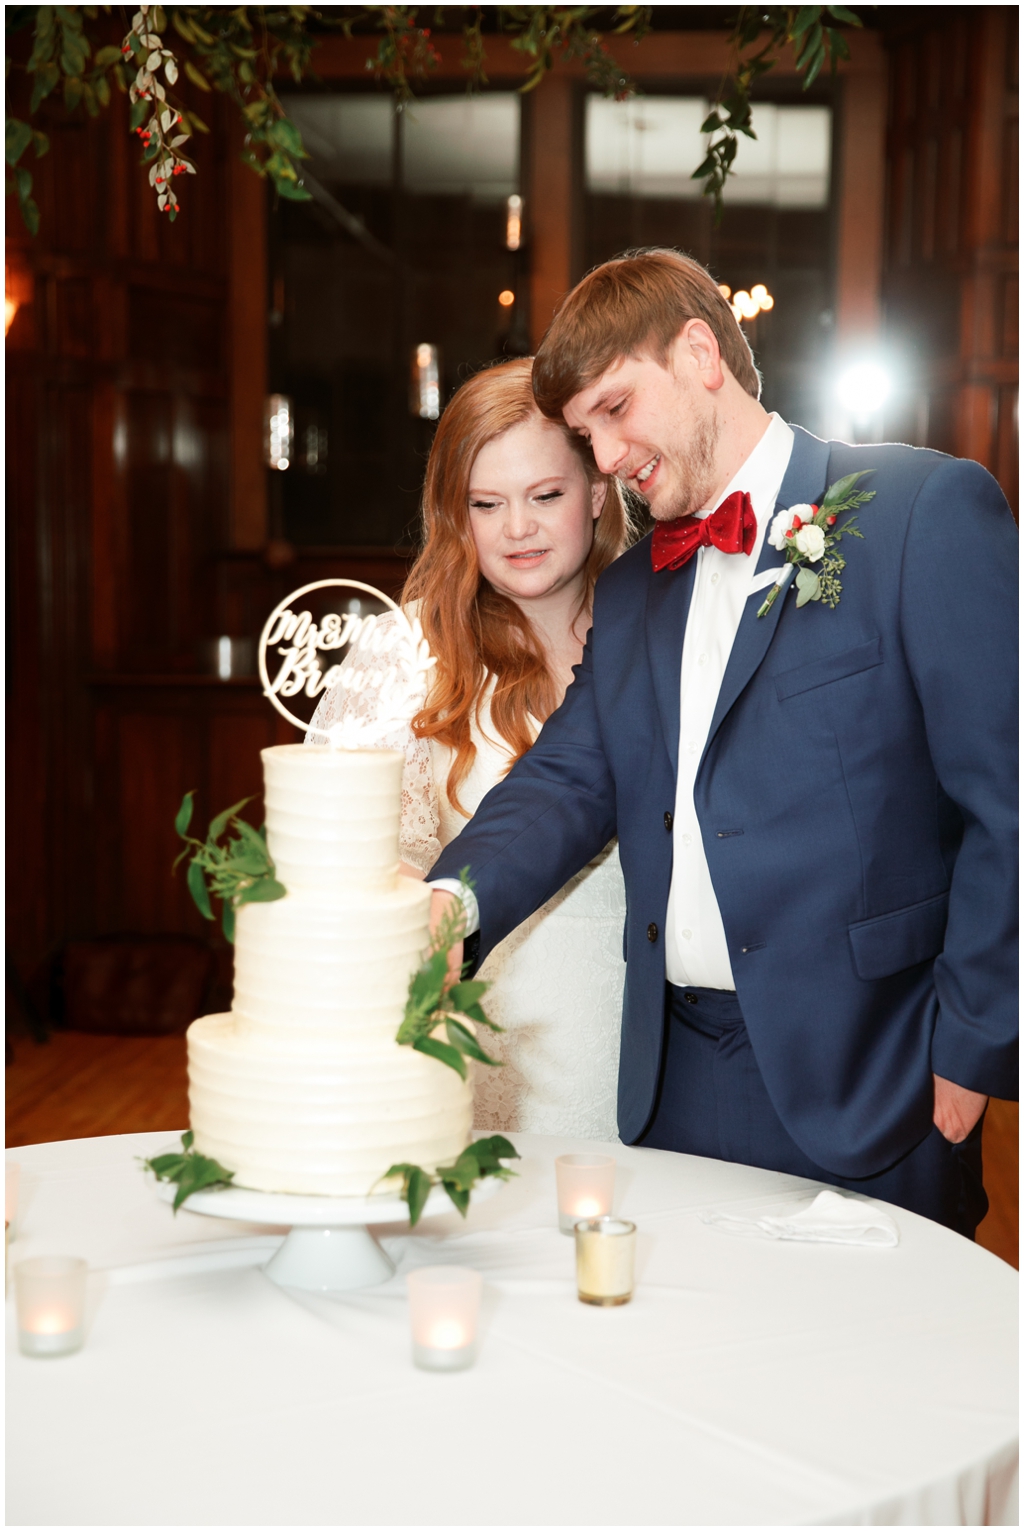 Bride and groom cut their cake at Asheville winter wedding 